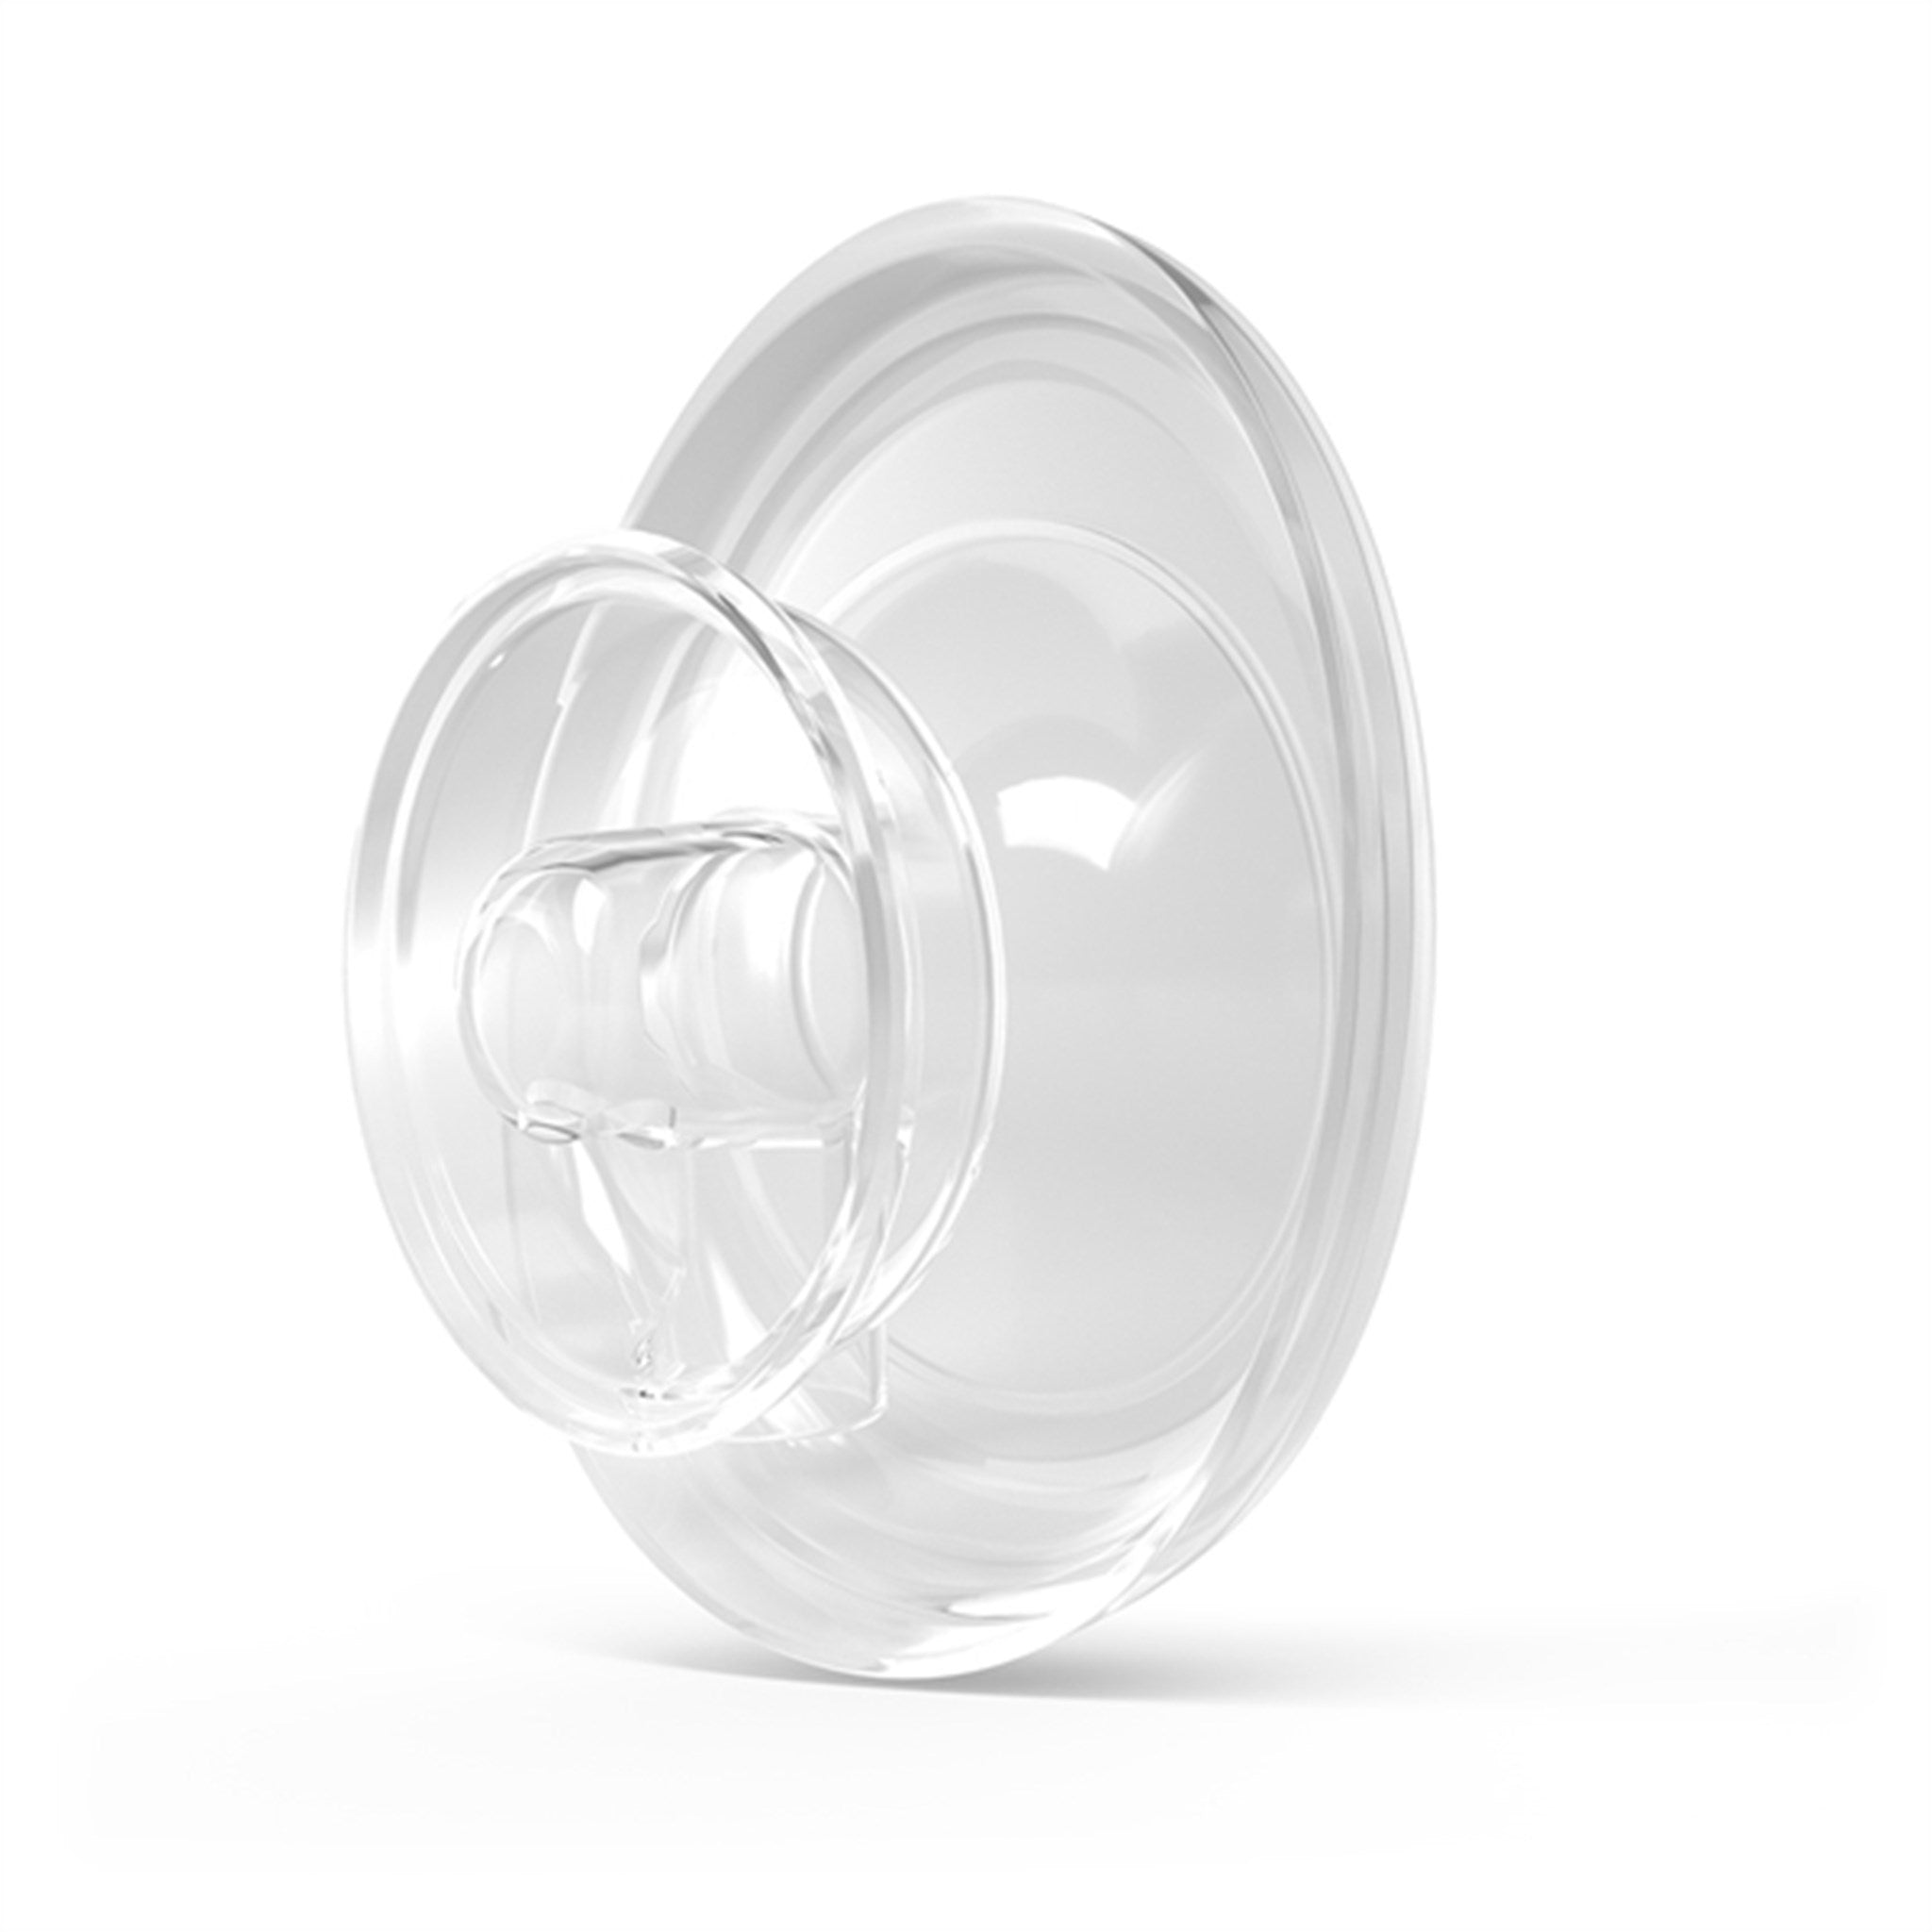 Elvie Stride Breast Shield 21 mm 2-Pack White/Clear